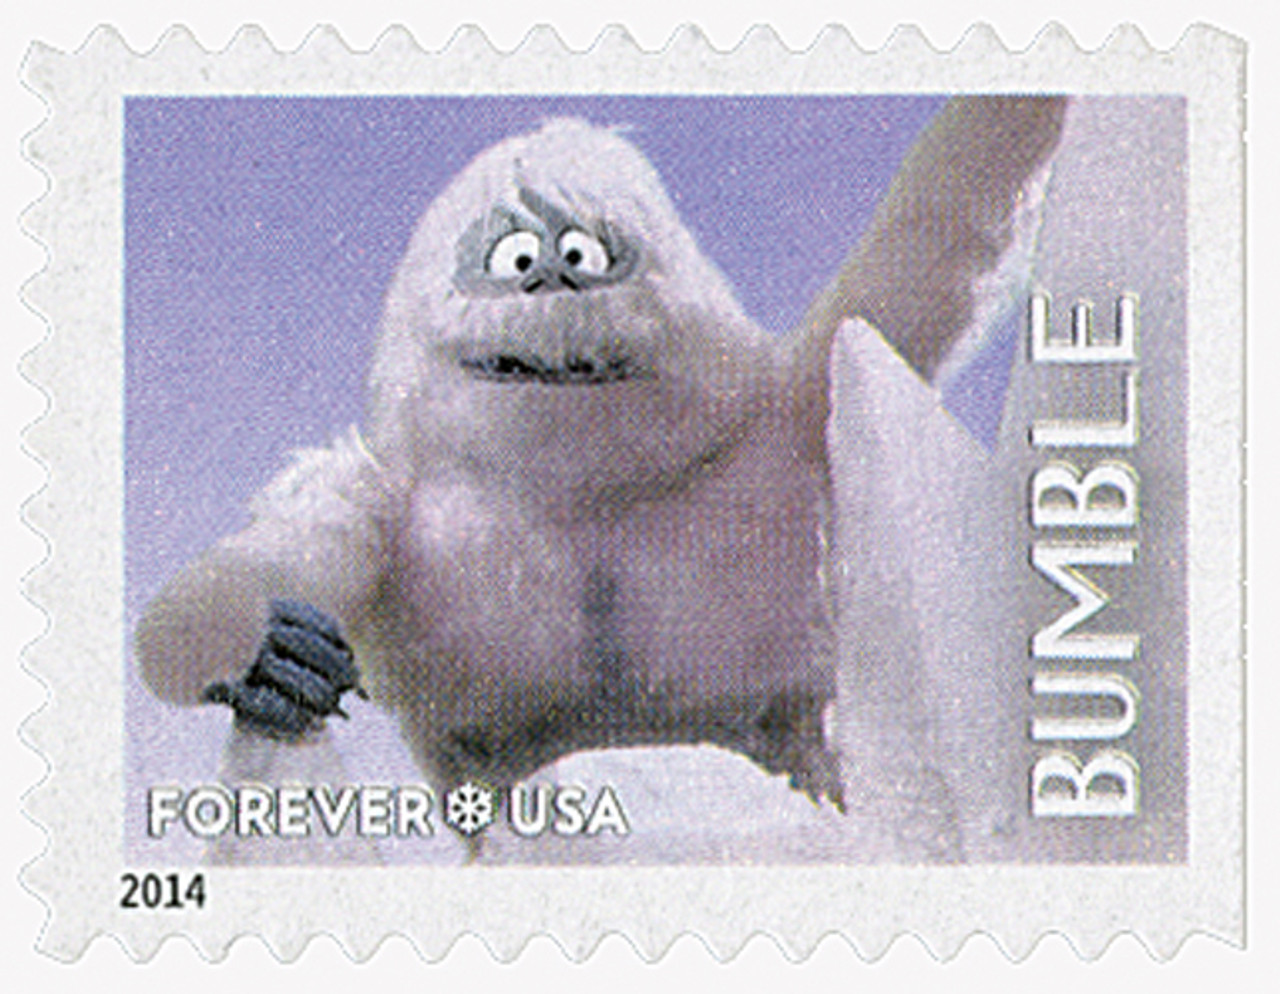 4941-44 - 2014 First-Class Forever Stamp - Winter Fun (Ashton Potter, ATM  booklet) - Mystic Stamp Company